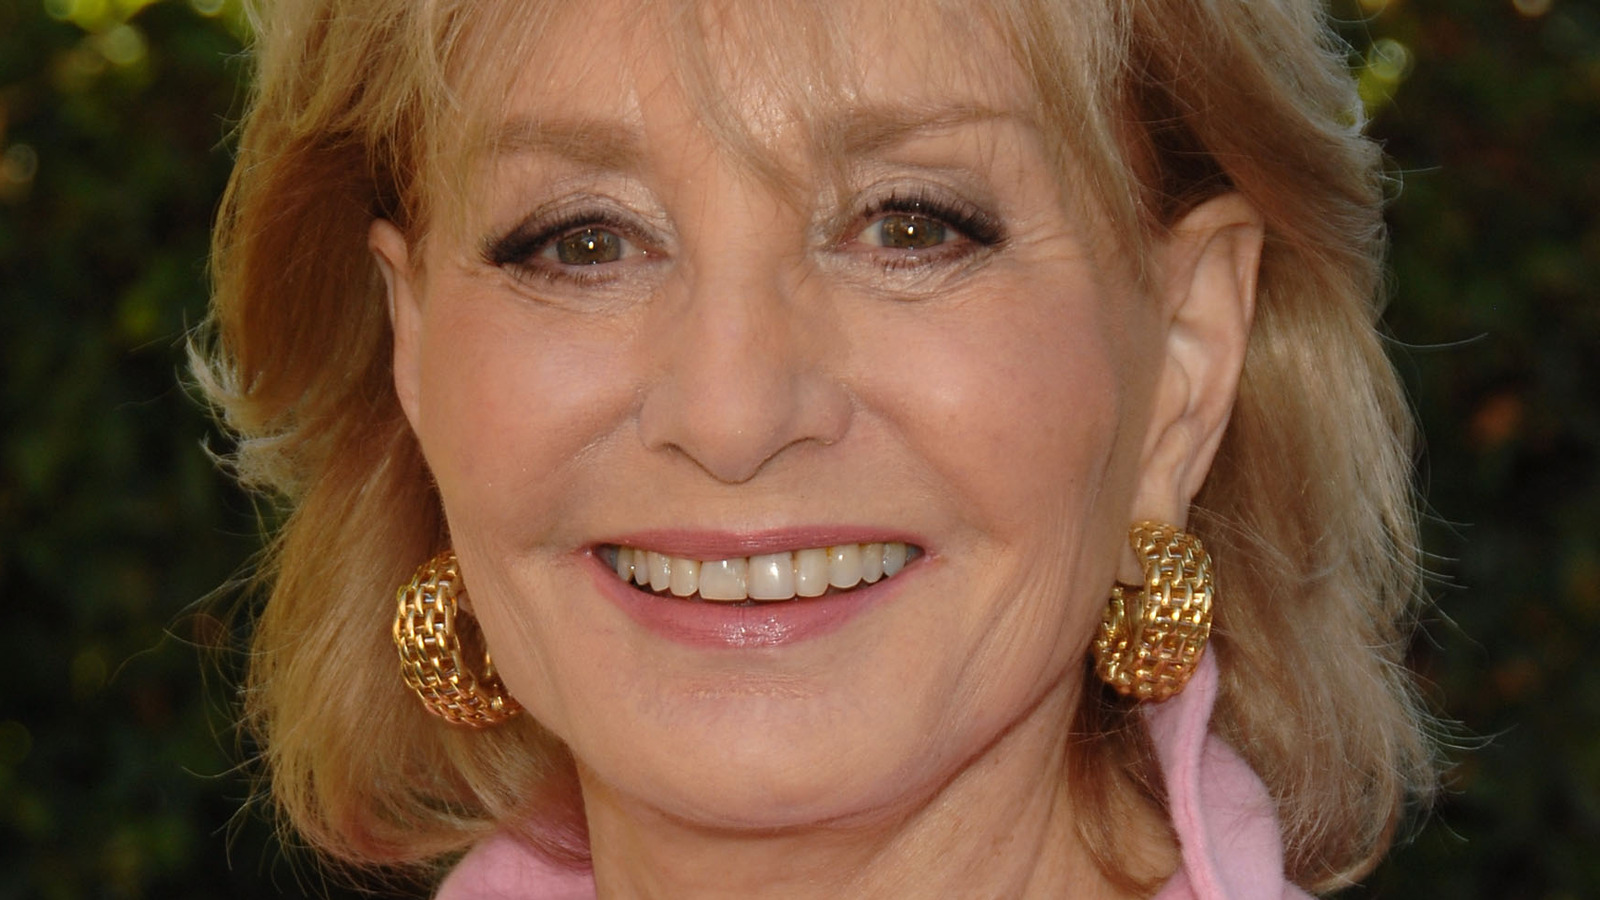 What we know about barbara walters plicated relationship with her sister jackie